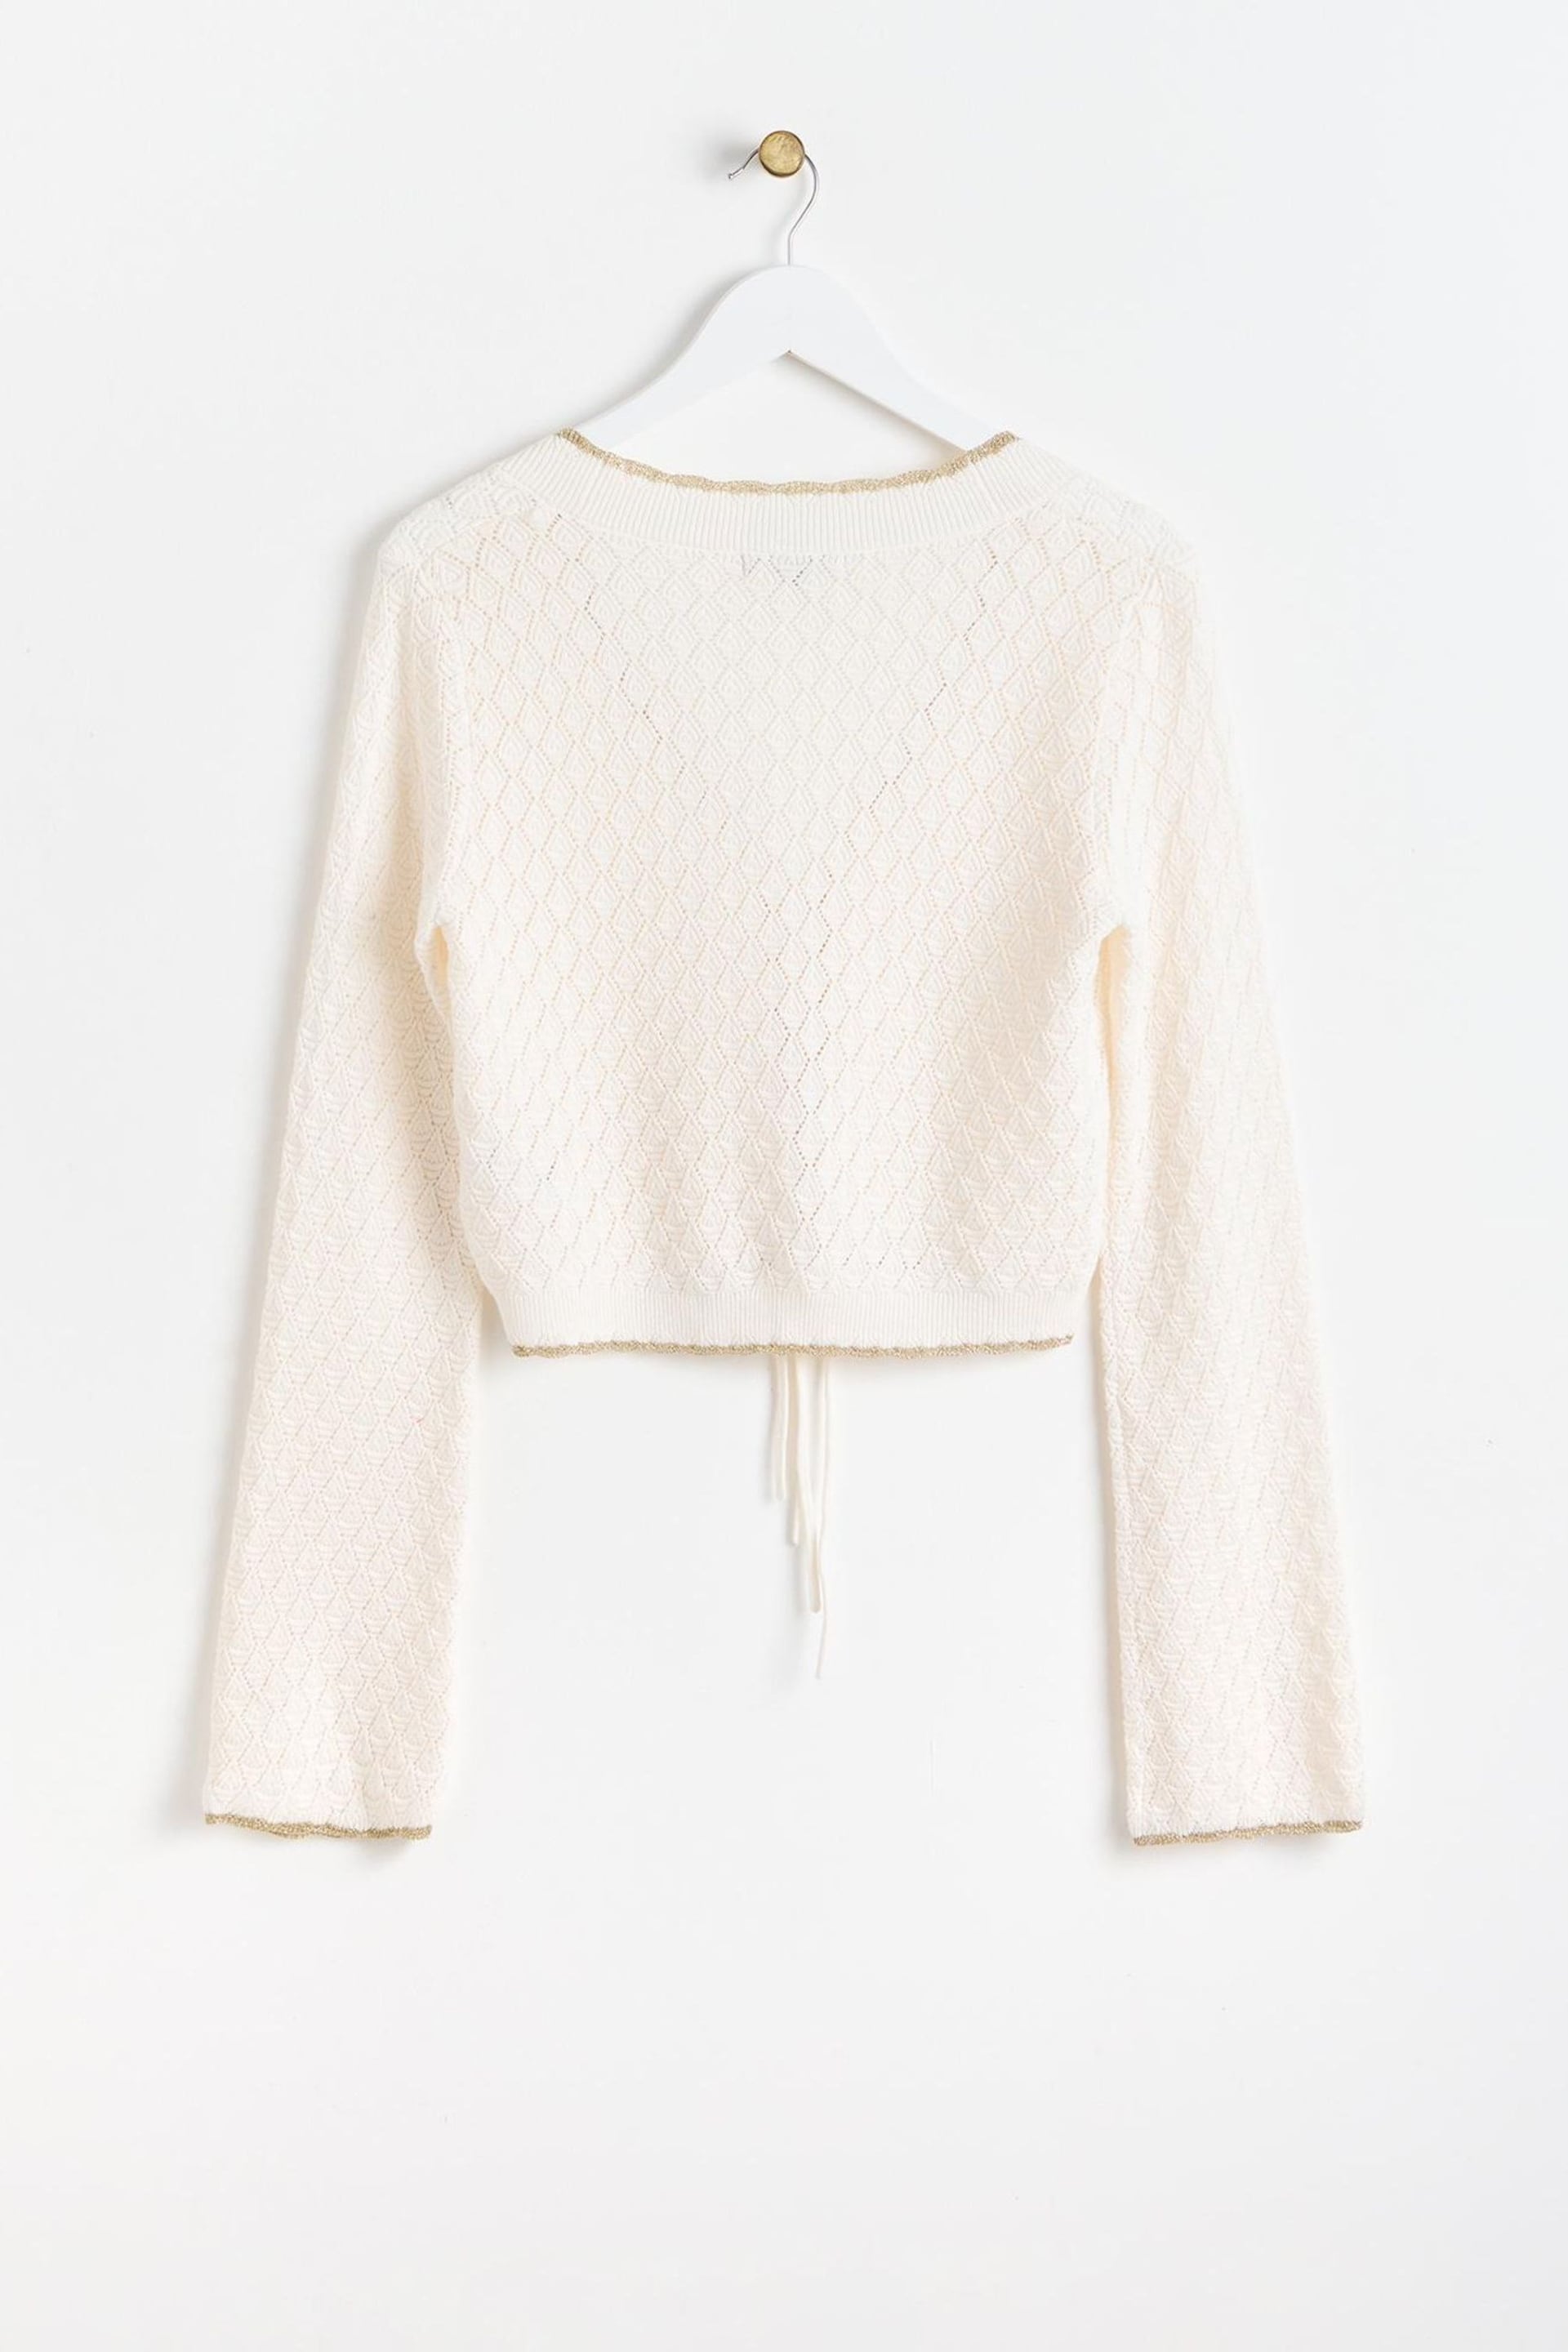 Oliver Bonas White Sparkle Knitted Tie Cardigan - Image 5 of 9